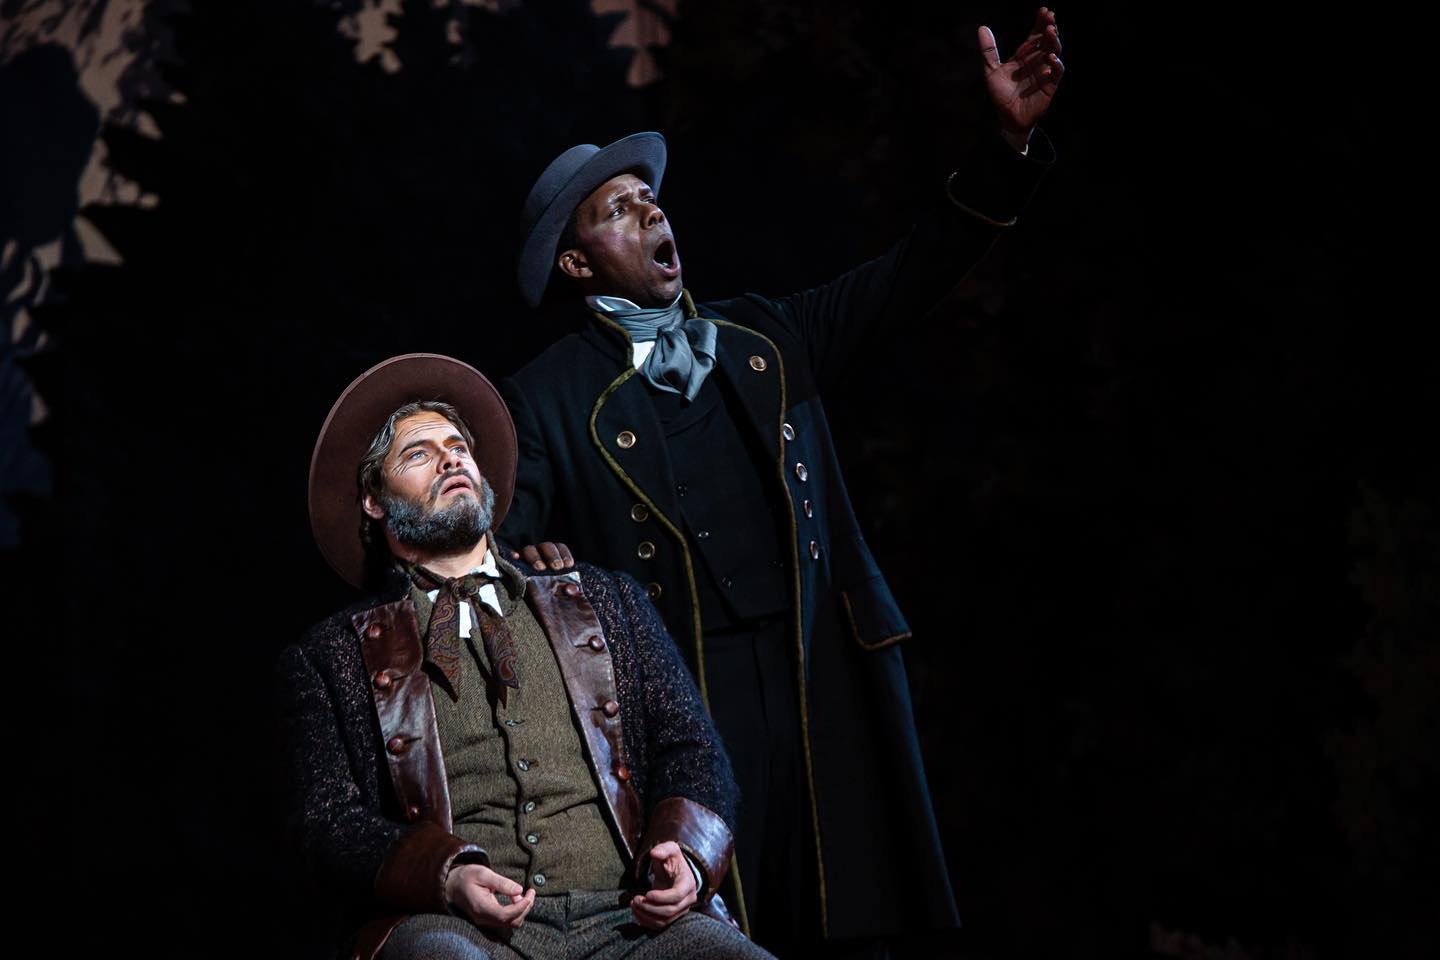 IN REVIEW: baritones SCOTT LEE as Antonio (left) and MICHAEL REDDING as Il prefetto (right) in A.J. Fletcher Opera Institute's February 2022 production of Gaetano Donizetti's LINDA DI CHAMOUNIX [Photograph © by André Peele; used with permission]